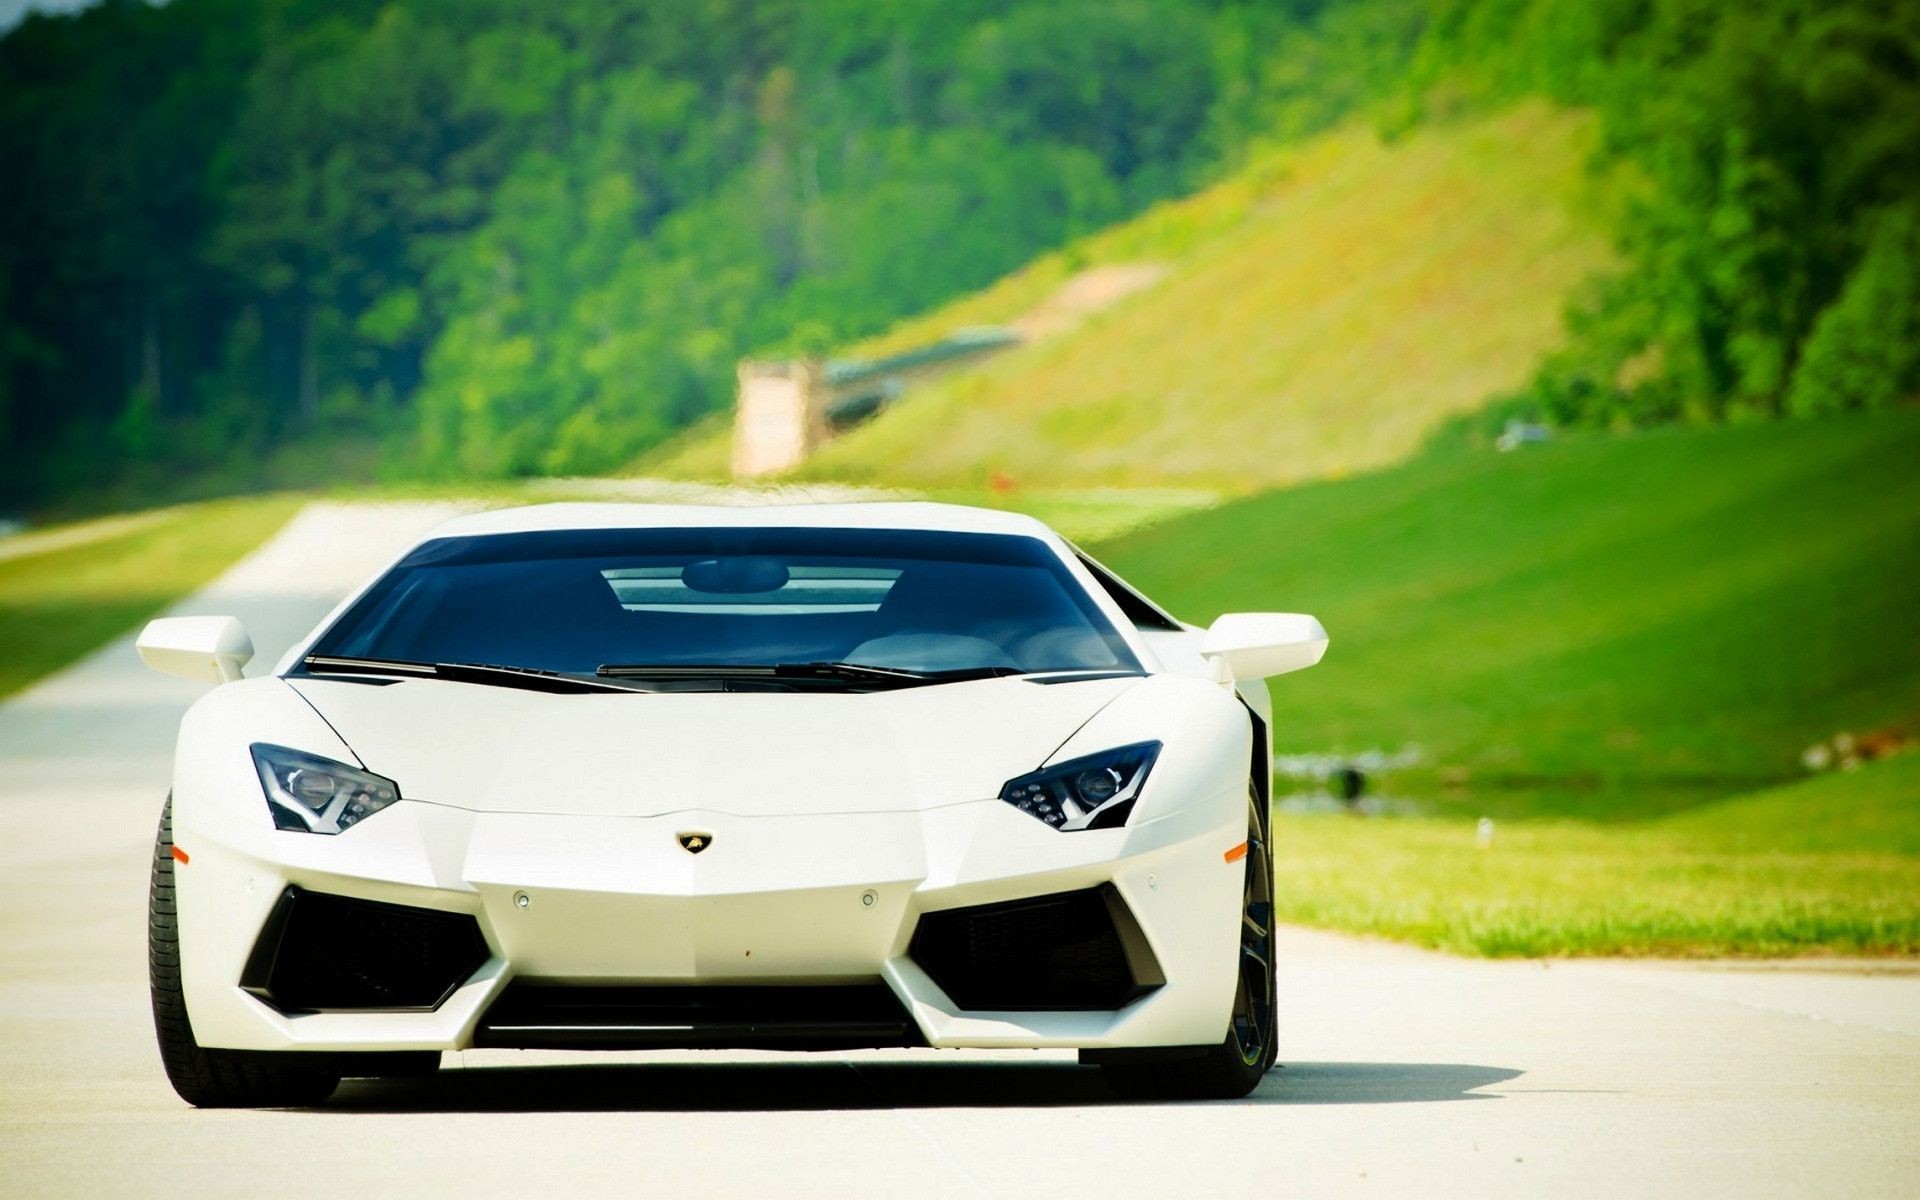 1920x1200 Today Wallpaper Download picture parts of Lamborghini HD Wallpapers  Wallpaper Cave, we'd like